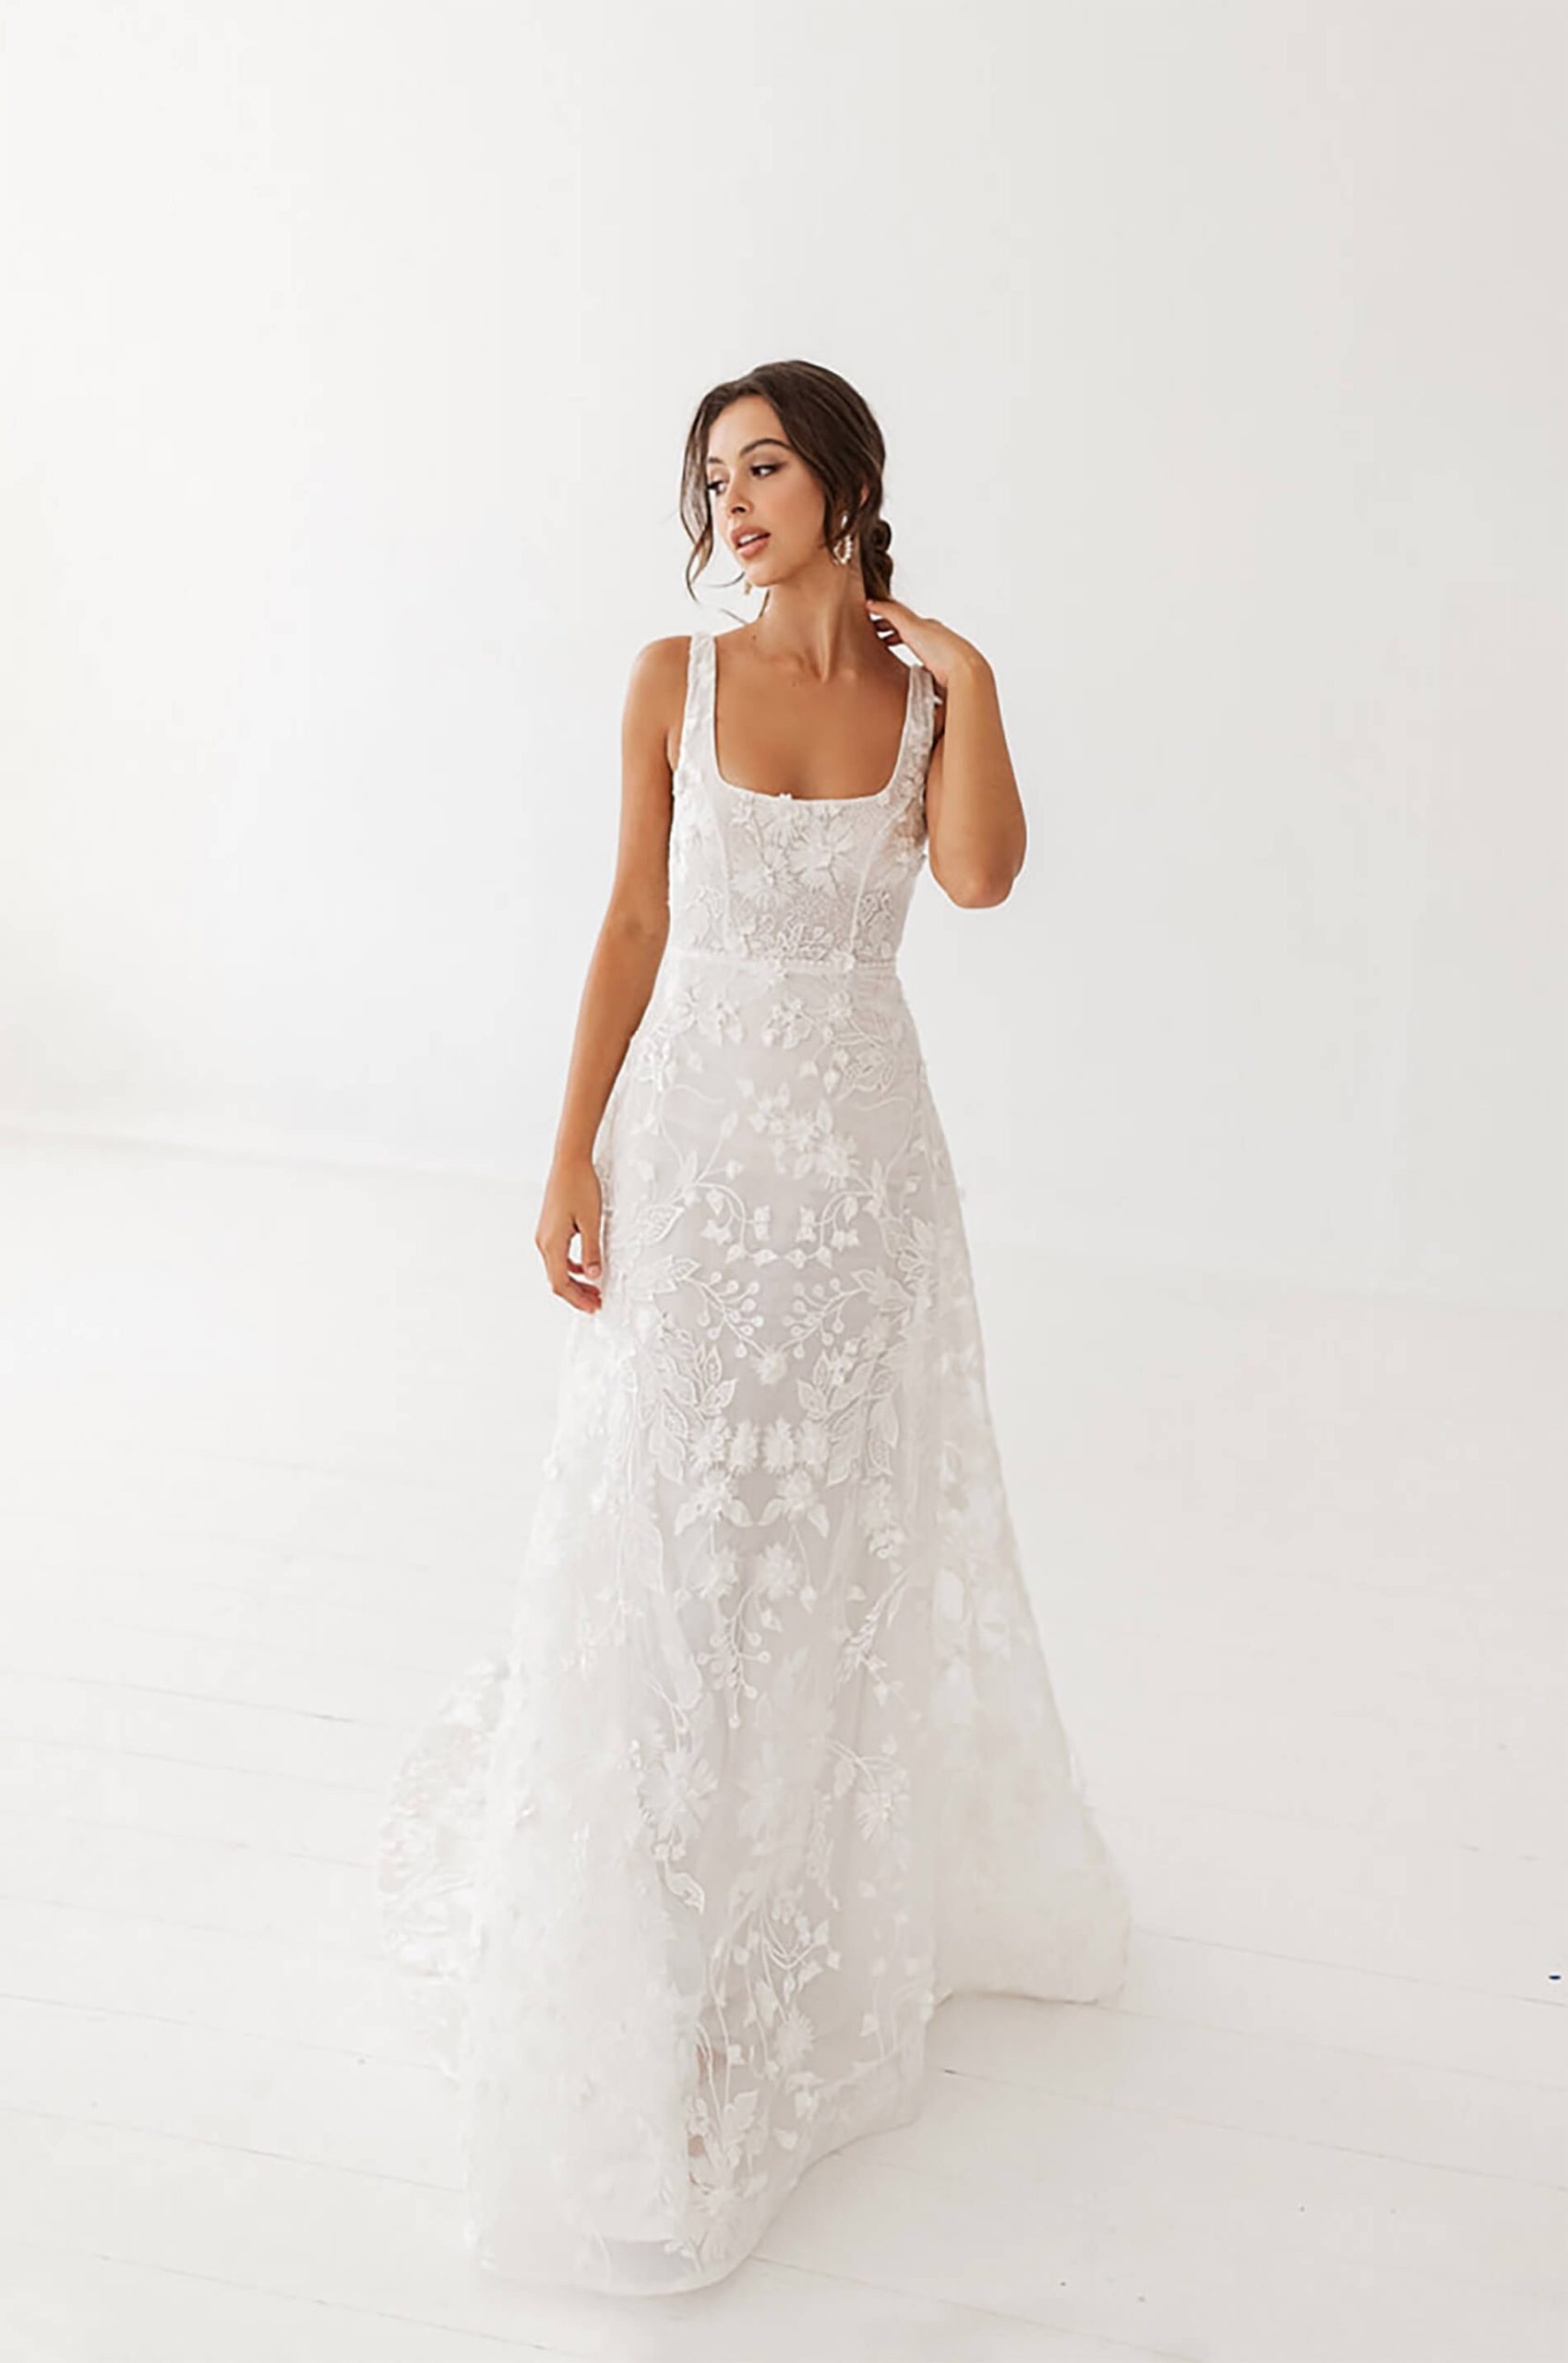 Ethereal lace wedding dress with square neckline. Dreamer by Cherie Oui.